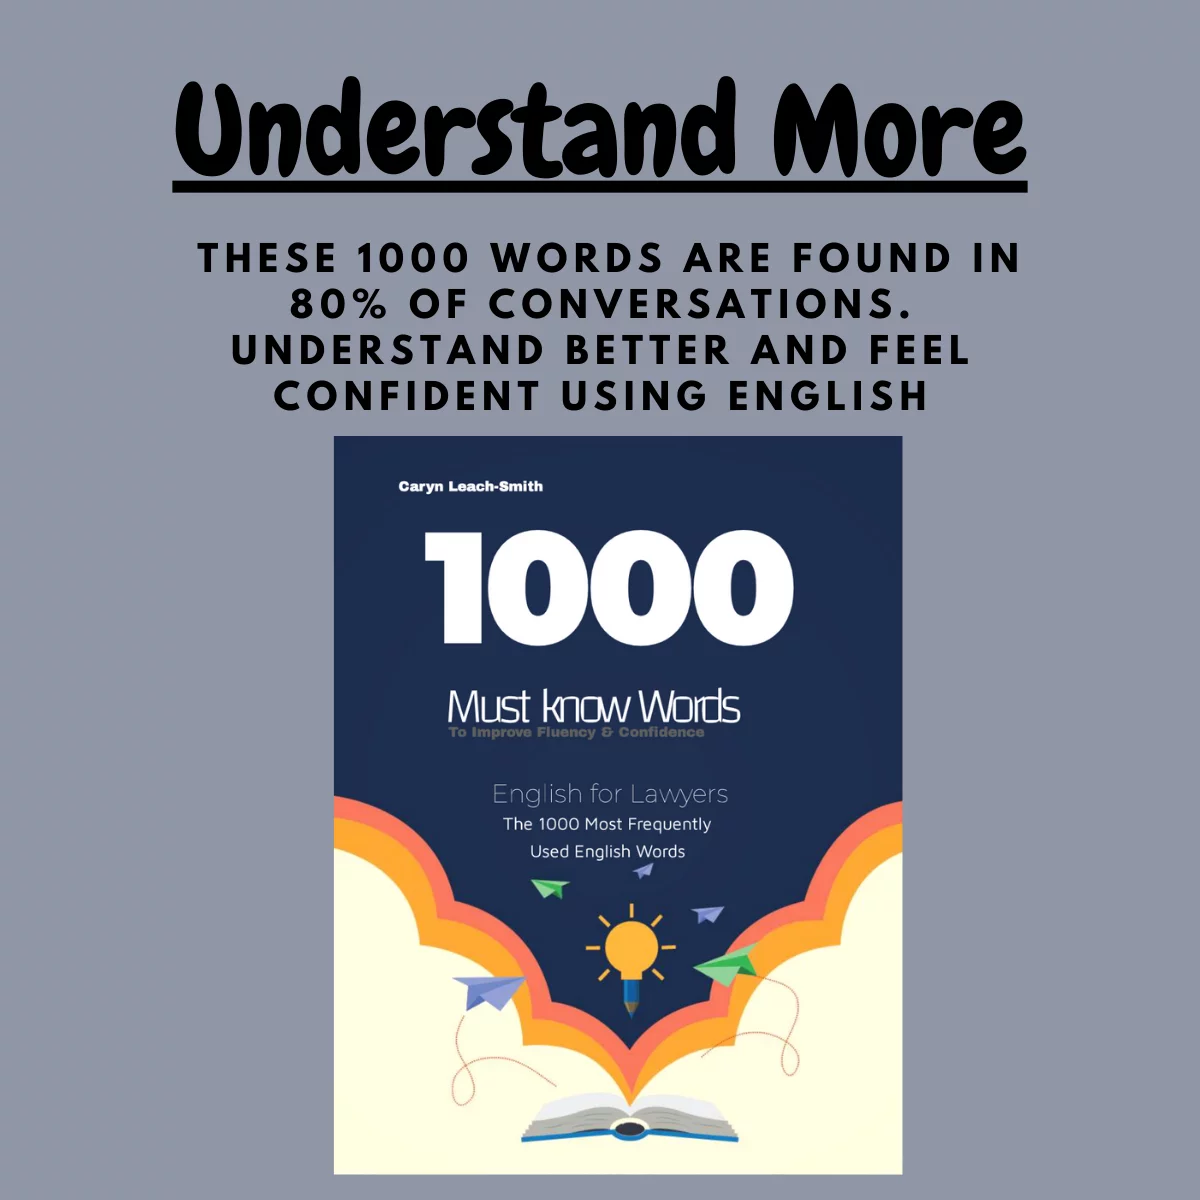 1000 most used words in English